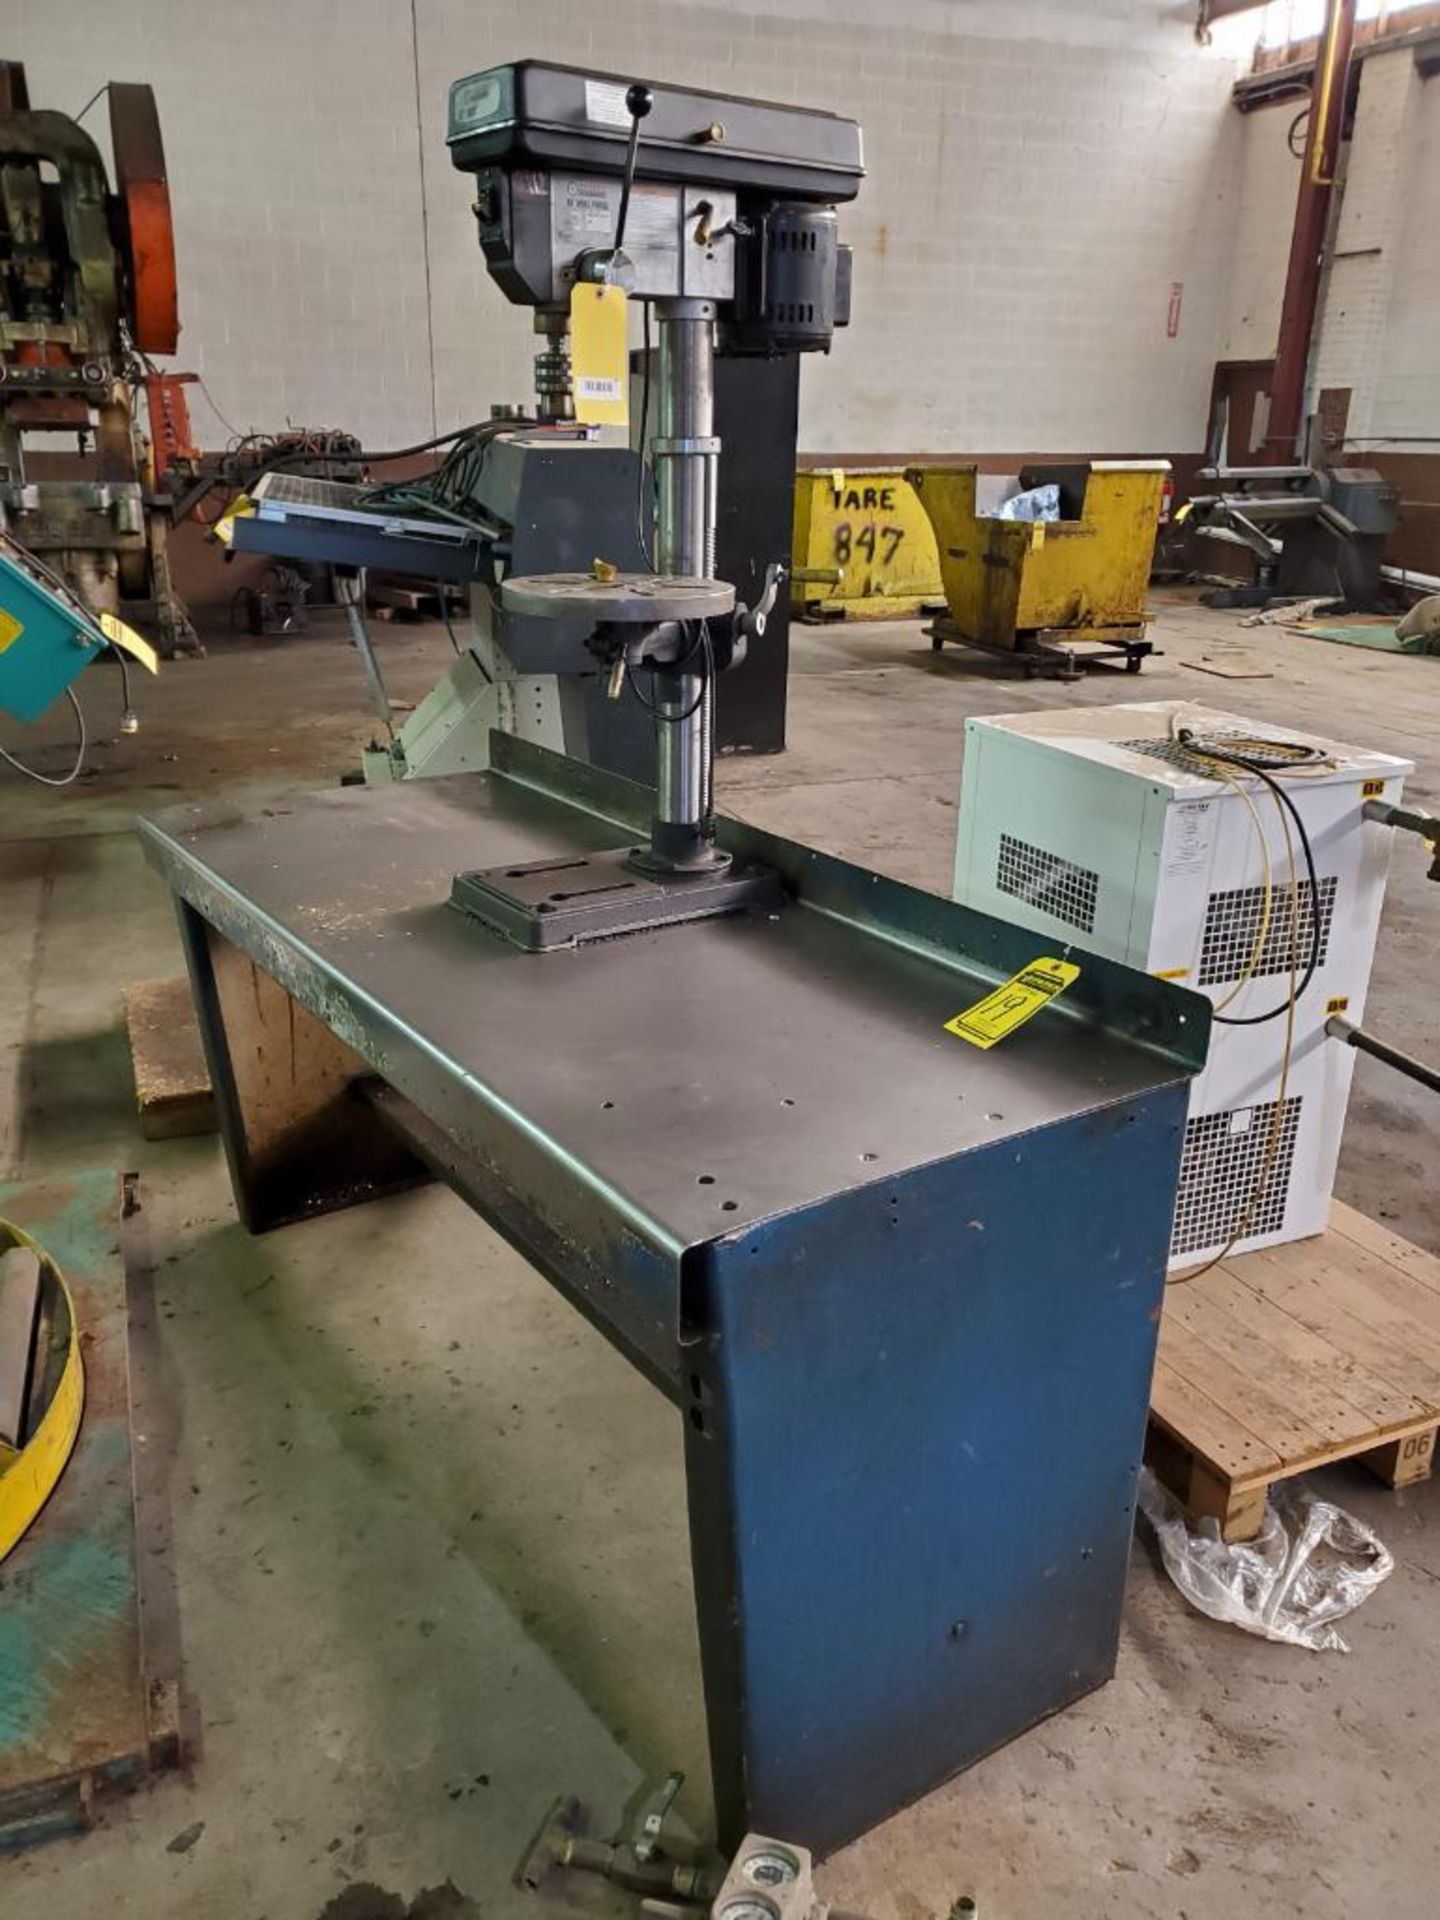 CENTRAL MACHINERY 13" VERTICAL BENCHTOP DRILL PRESS WITH STEEL TABLE, 12" DIA. TILT TABLE, 3-1/8"